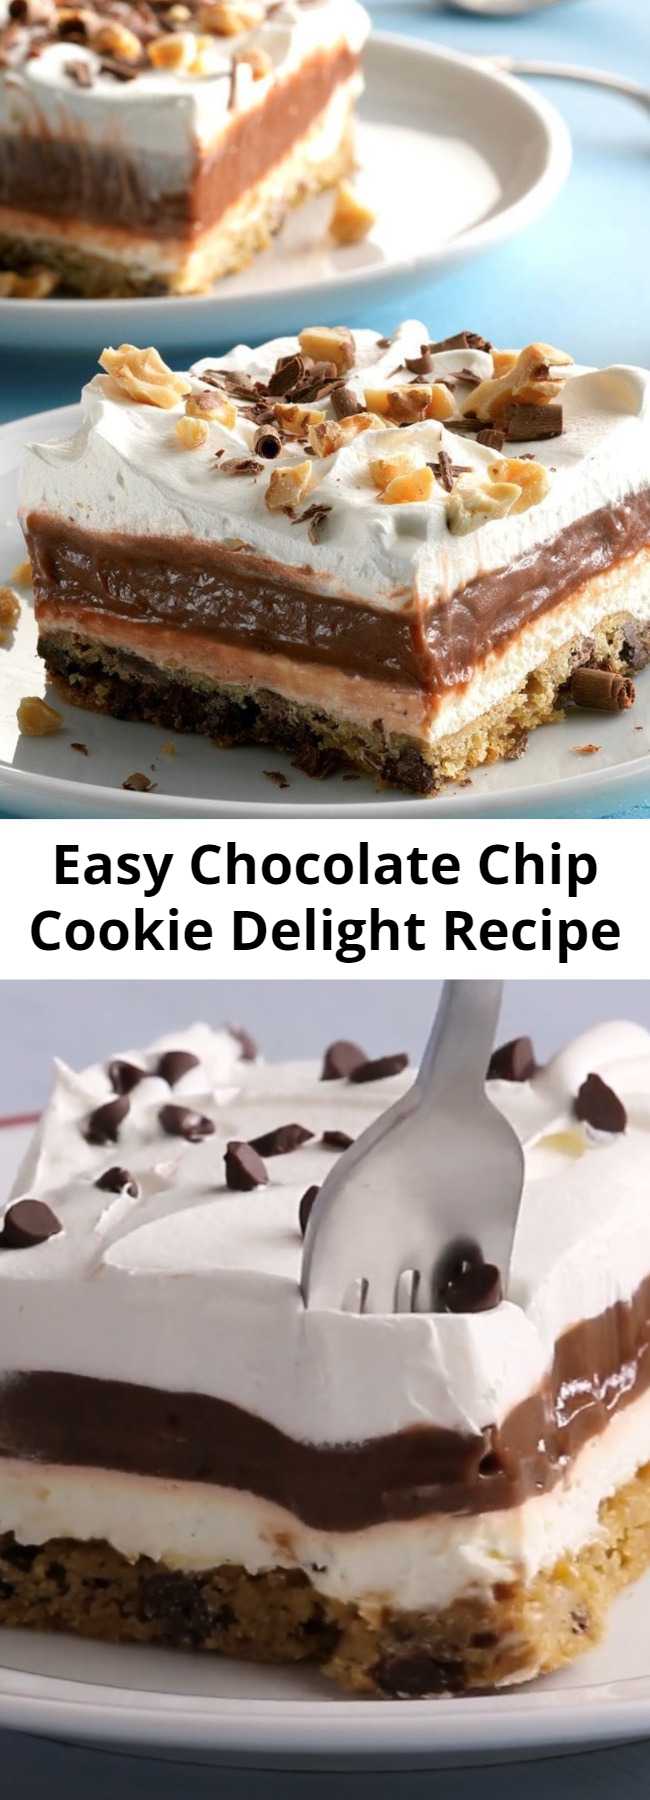 Easy Chocolate Chip Cookie Delight Recipe - This is a simple chocolate delight recipe for any type of potluck occasion, and the pan always comes home empty.